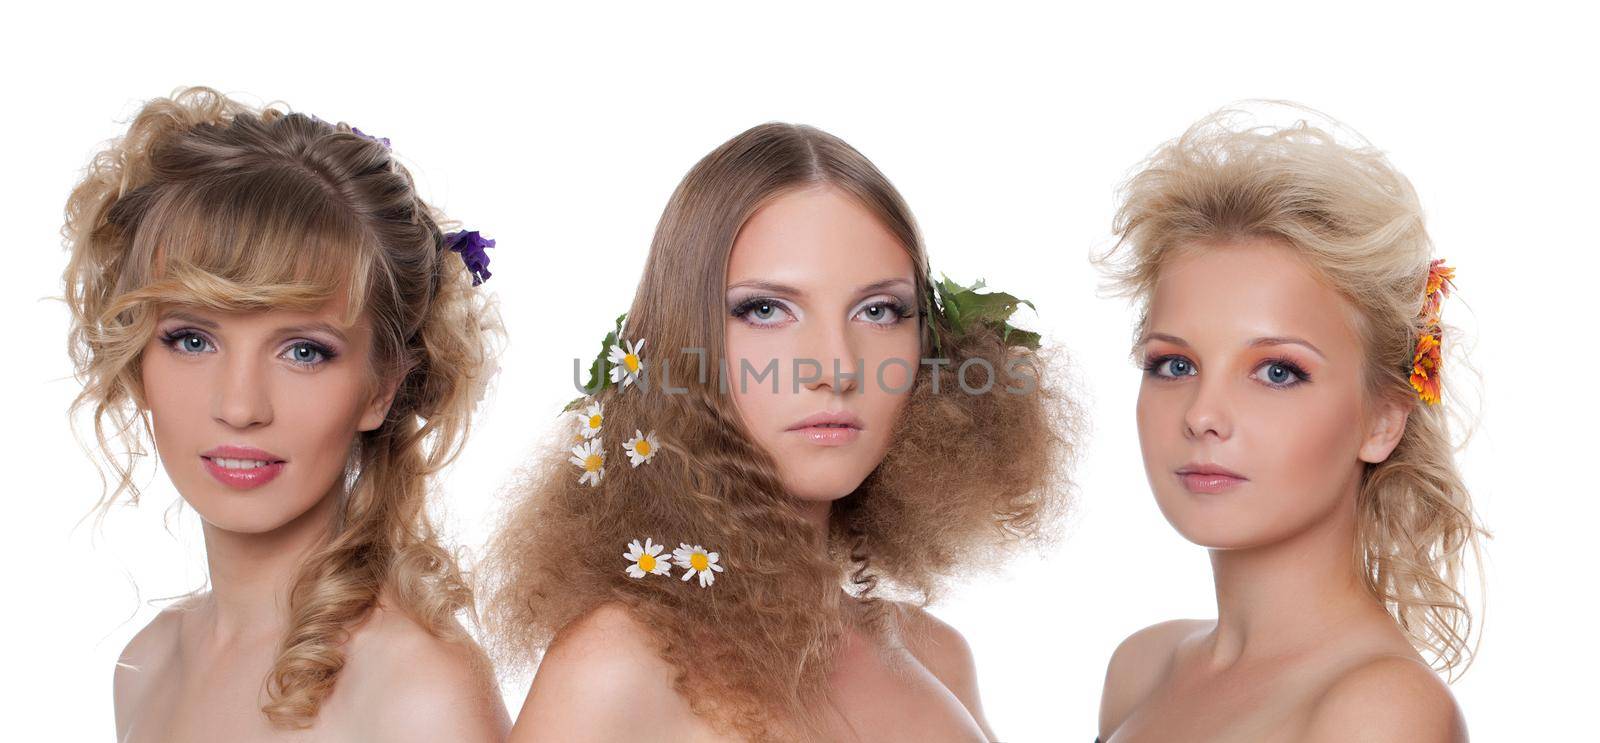 Three beautiful naked young women with season flower hair style